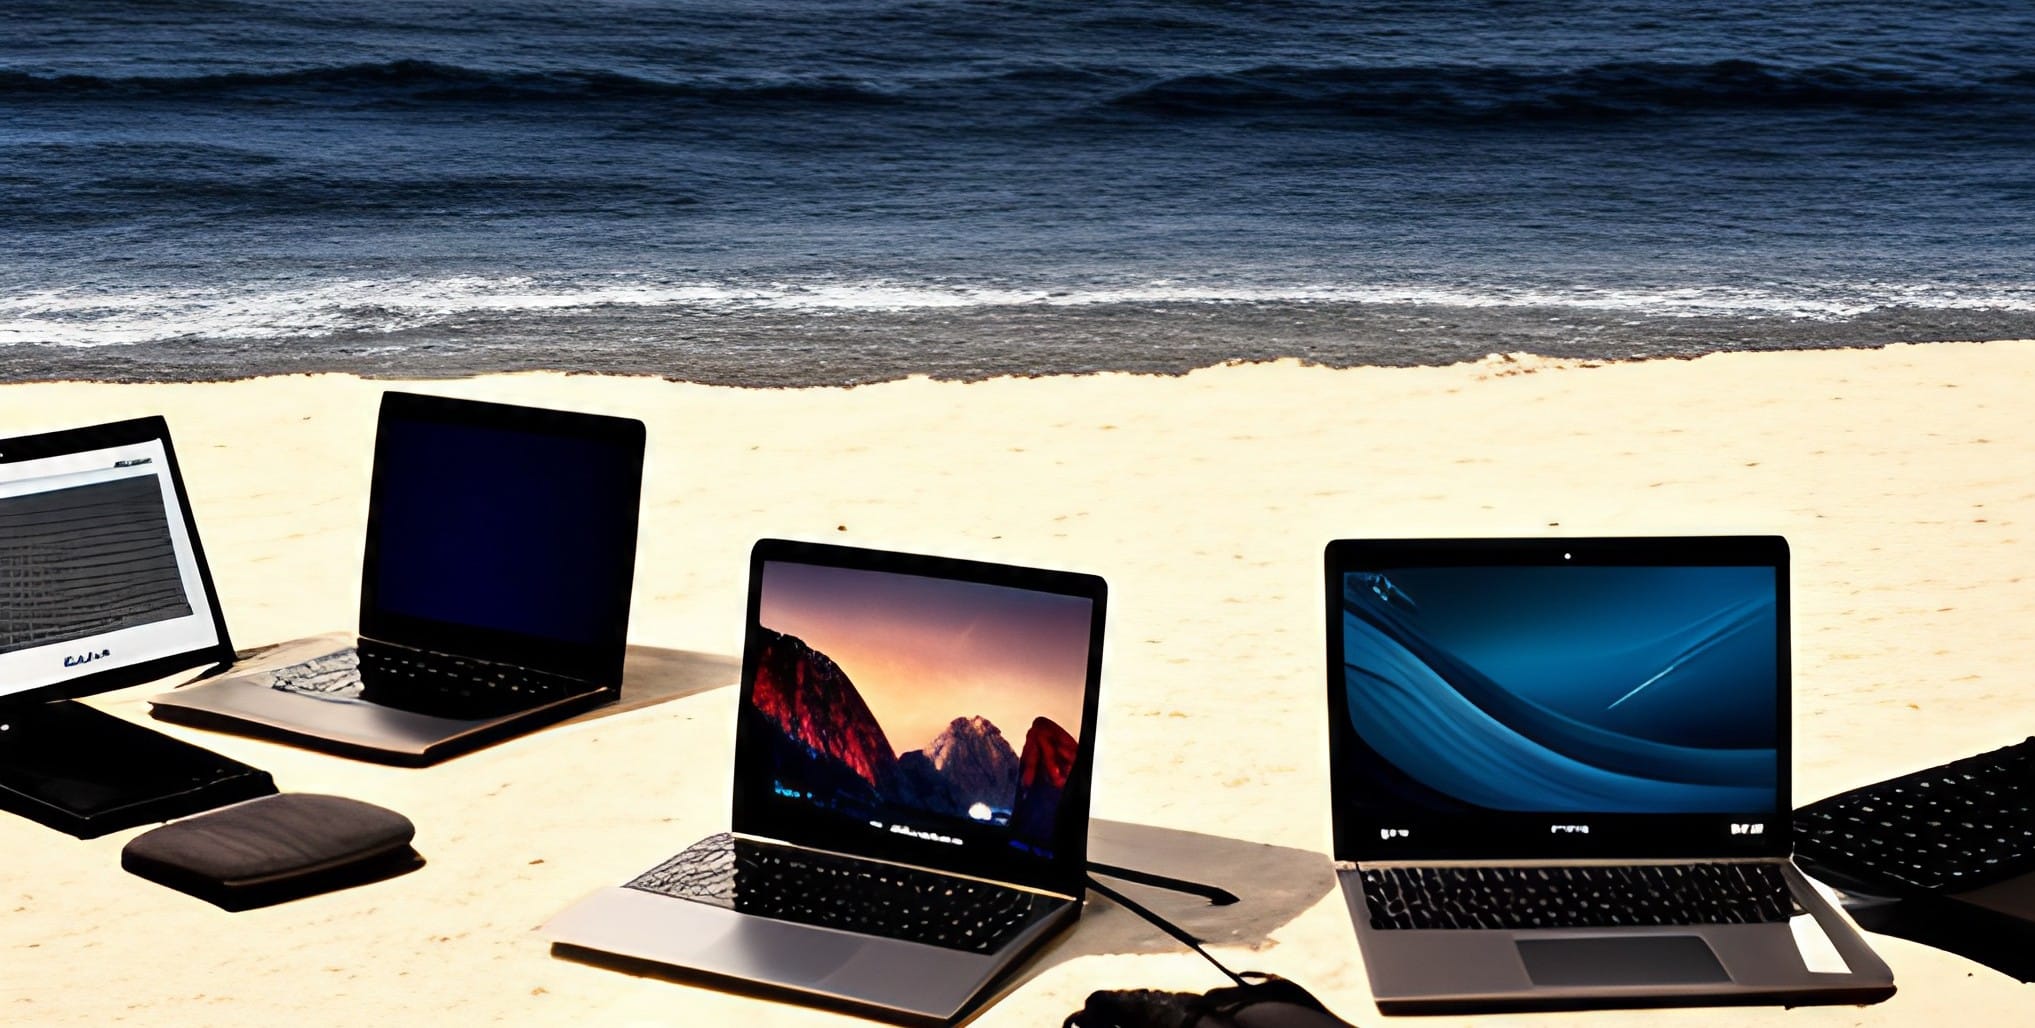 Our Top 5 Laptop Picks for Graduate Students